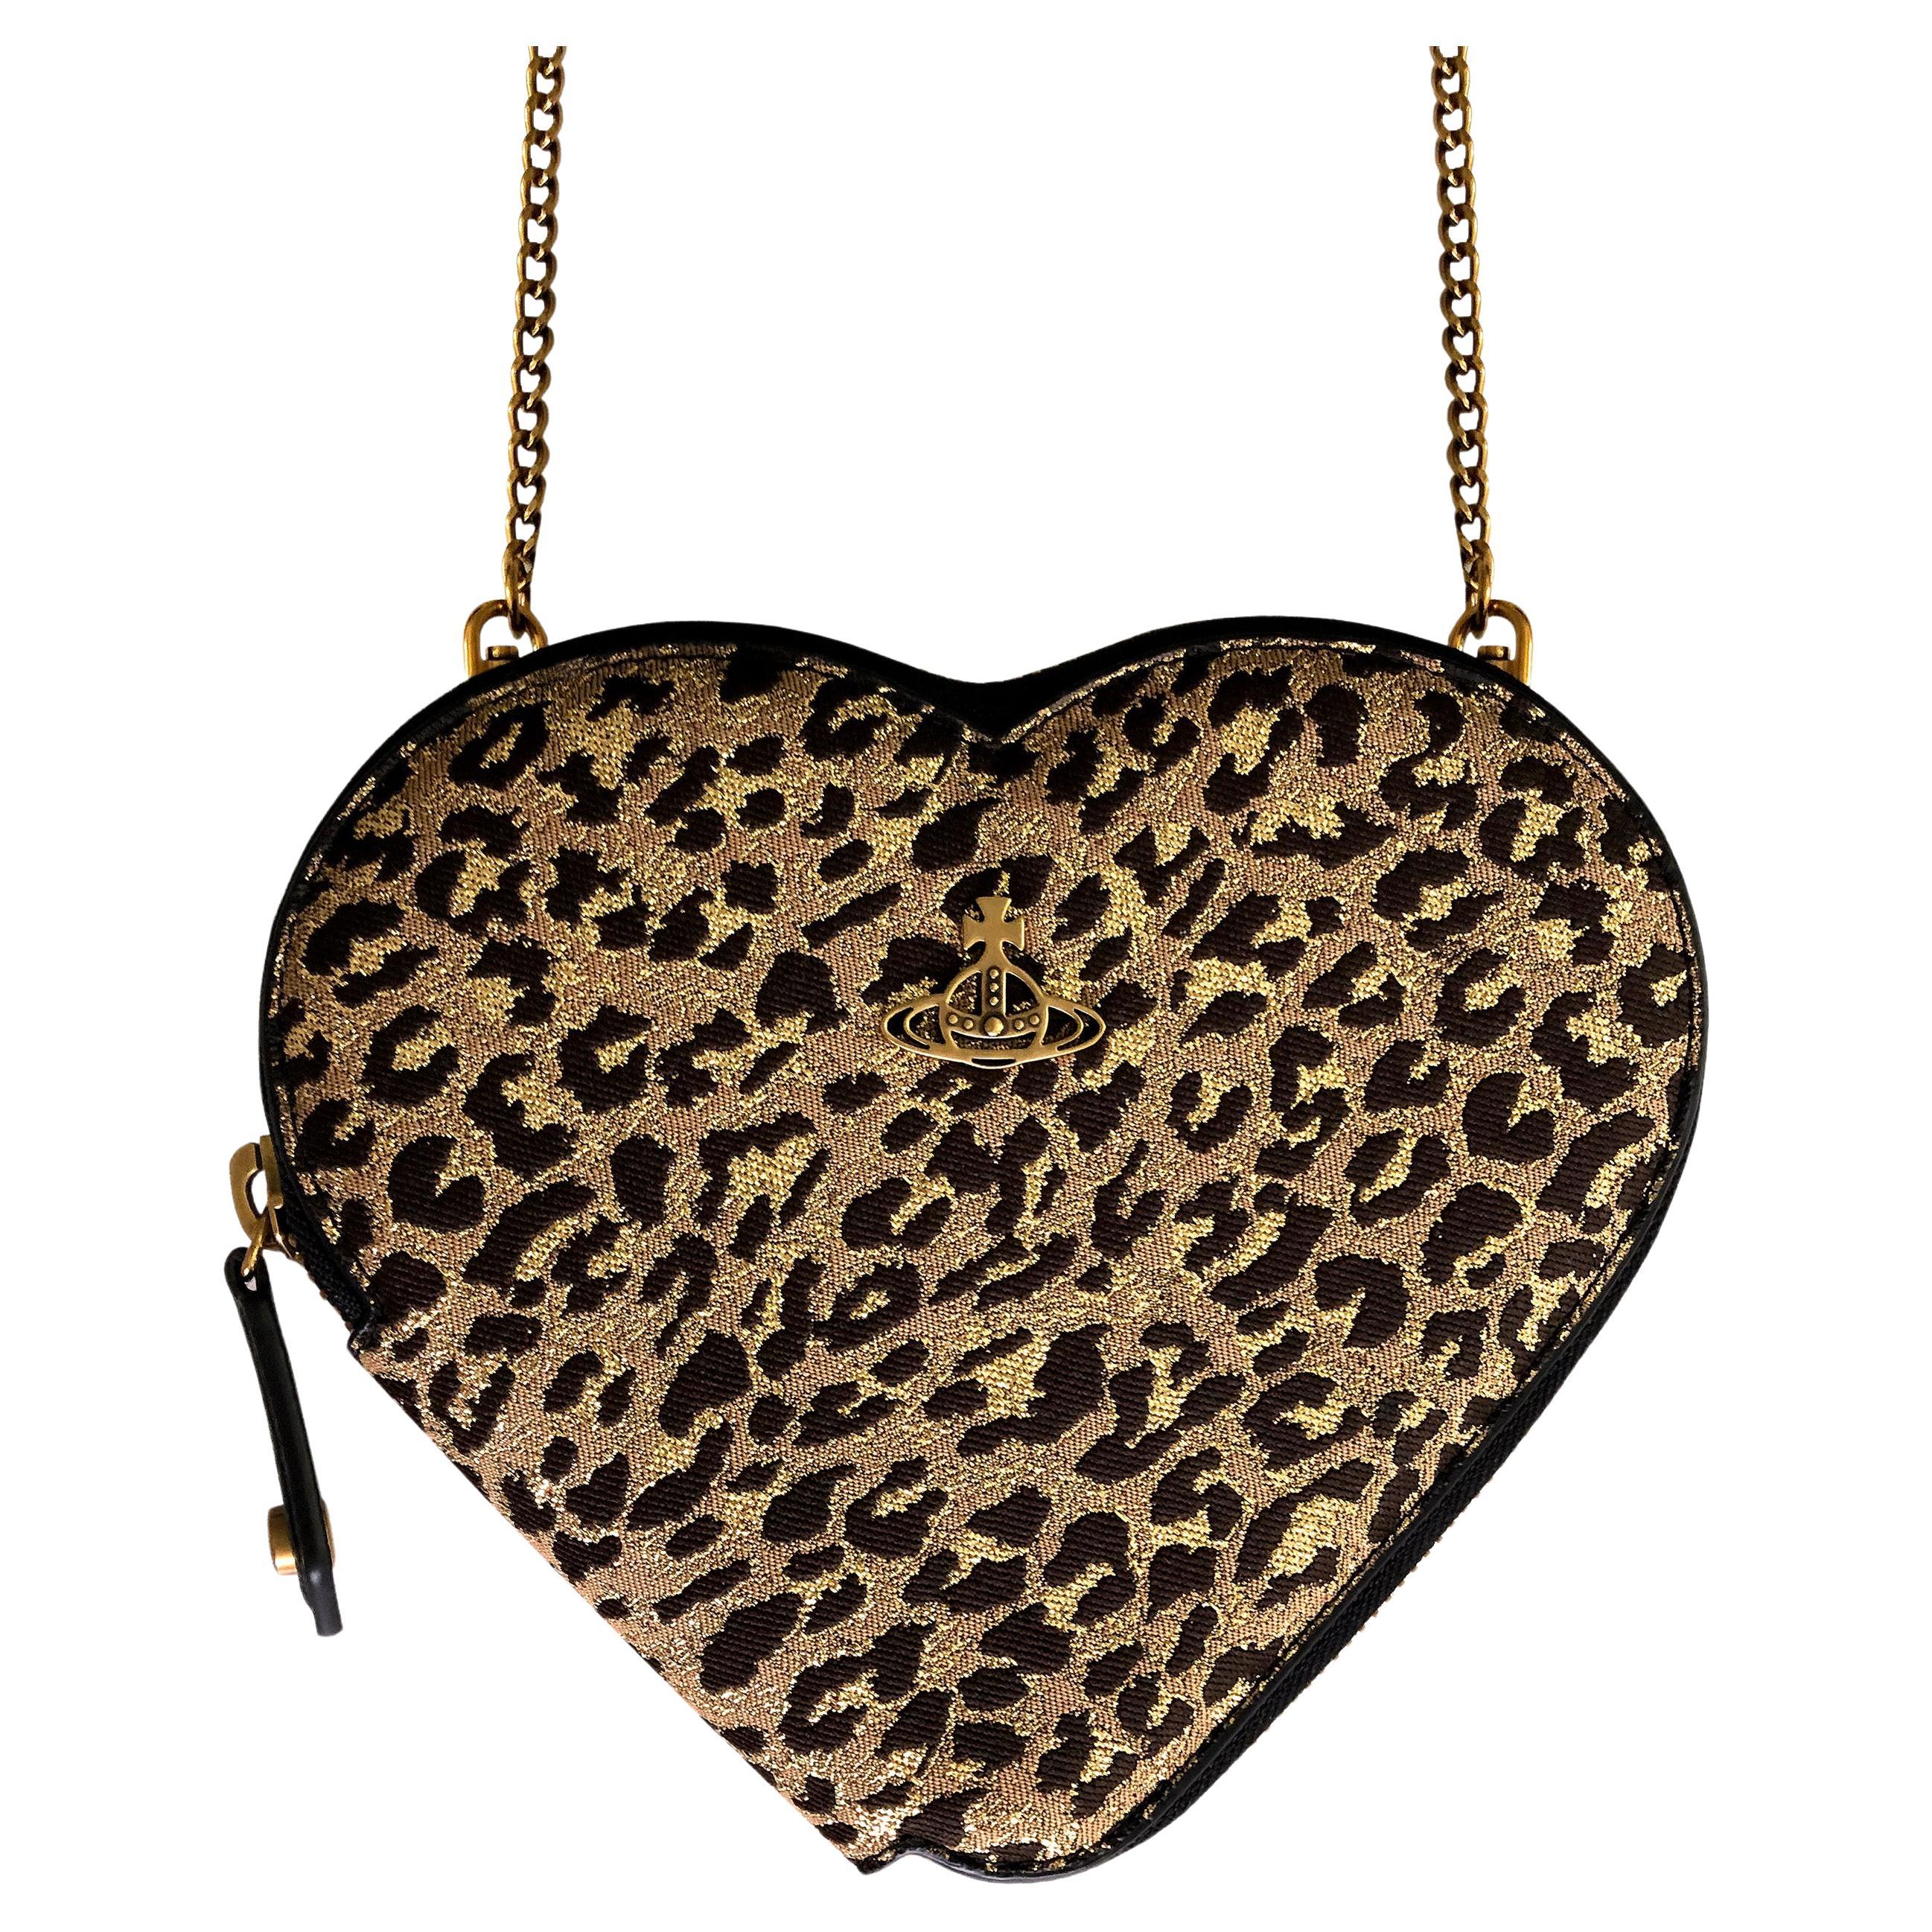 Vivienne Westwood - Heart Crossbody Bag - Gold Leopard Jacquard - NEW With Tags For Sale